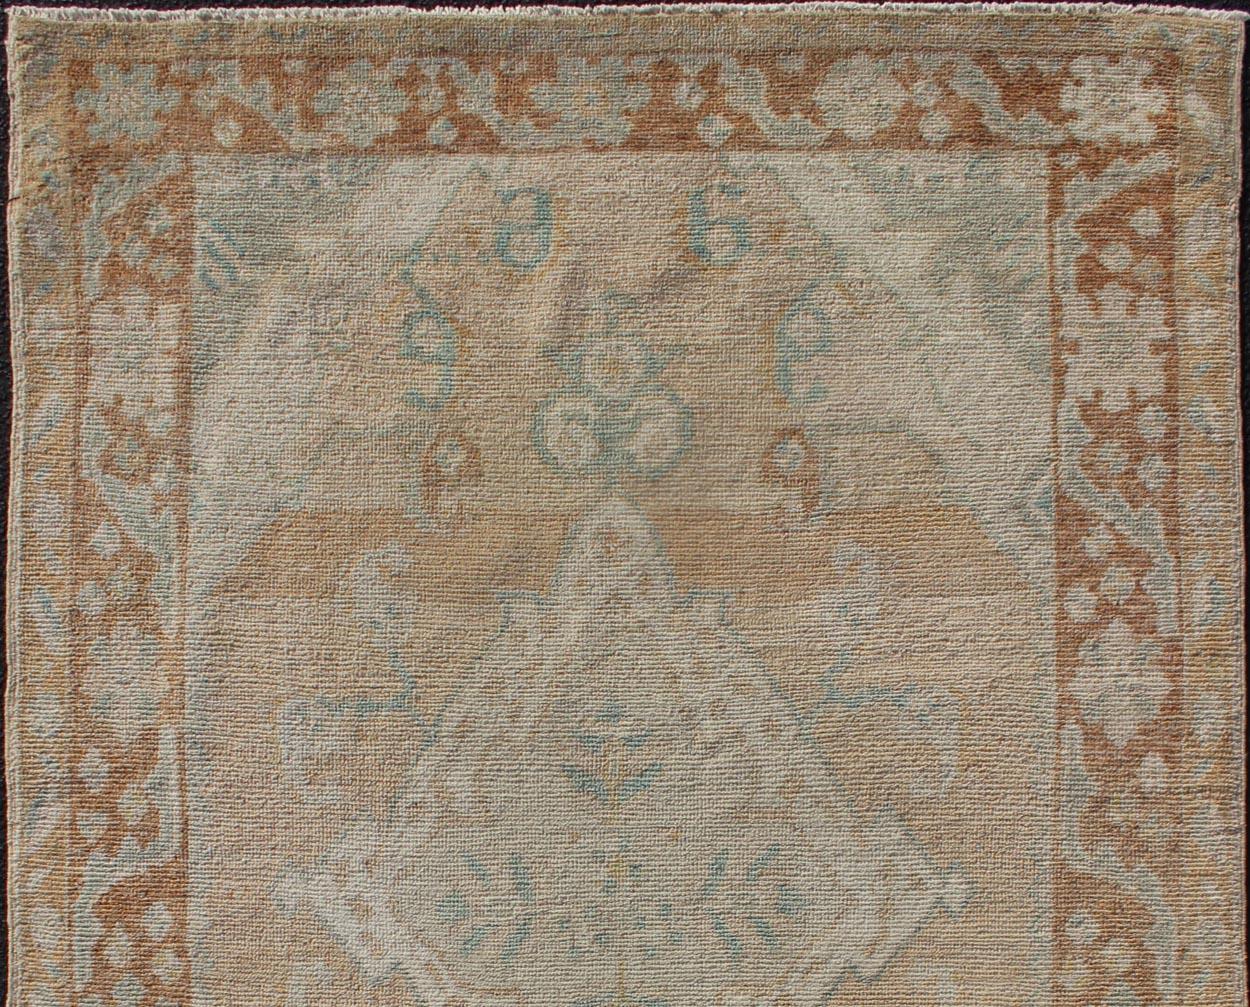 Nice vintage Turkish Oushak rug wit an understated medallion with flowers and geometric motifs, rug EN-179557, country of origin / type: Turkey / Oushak, circa 1940

This magnificent Oushak carpet from Turkey boasts a large center medallion in